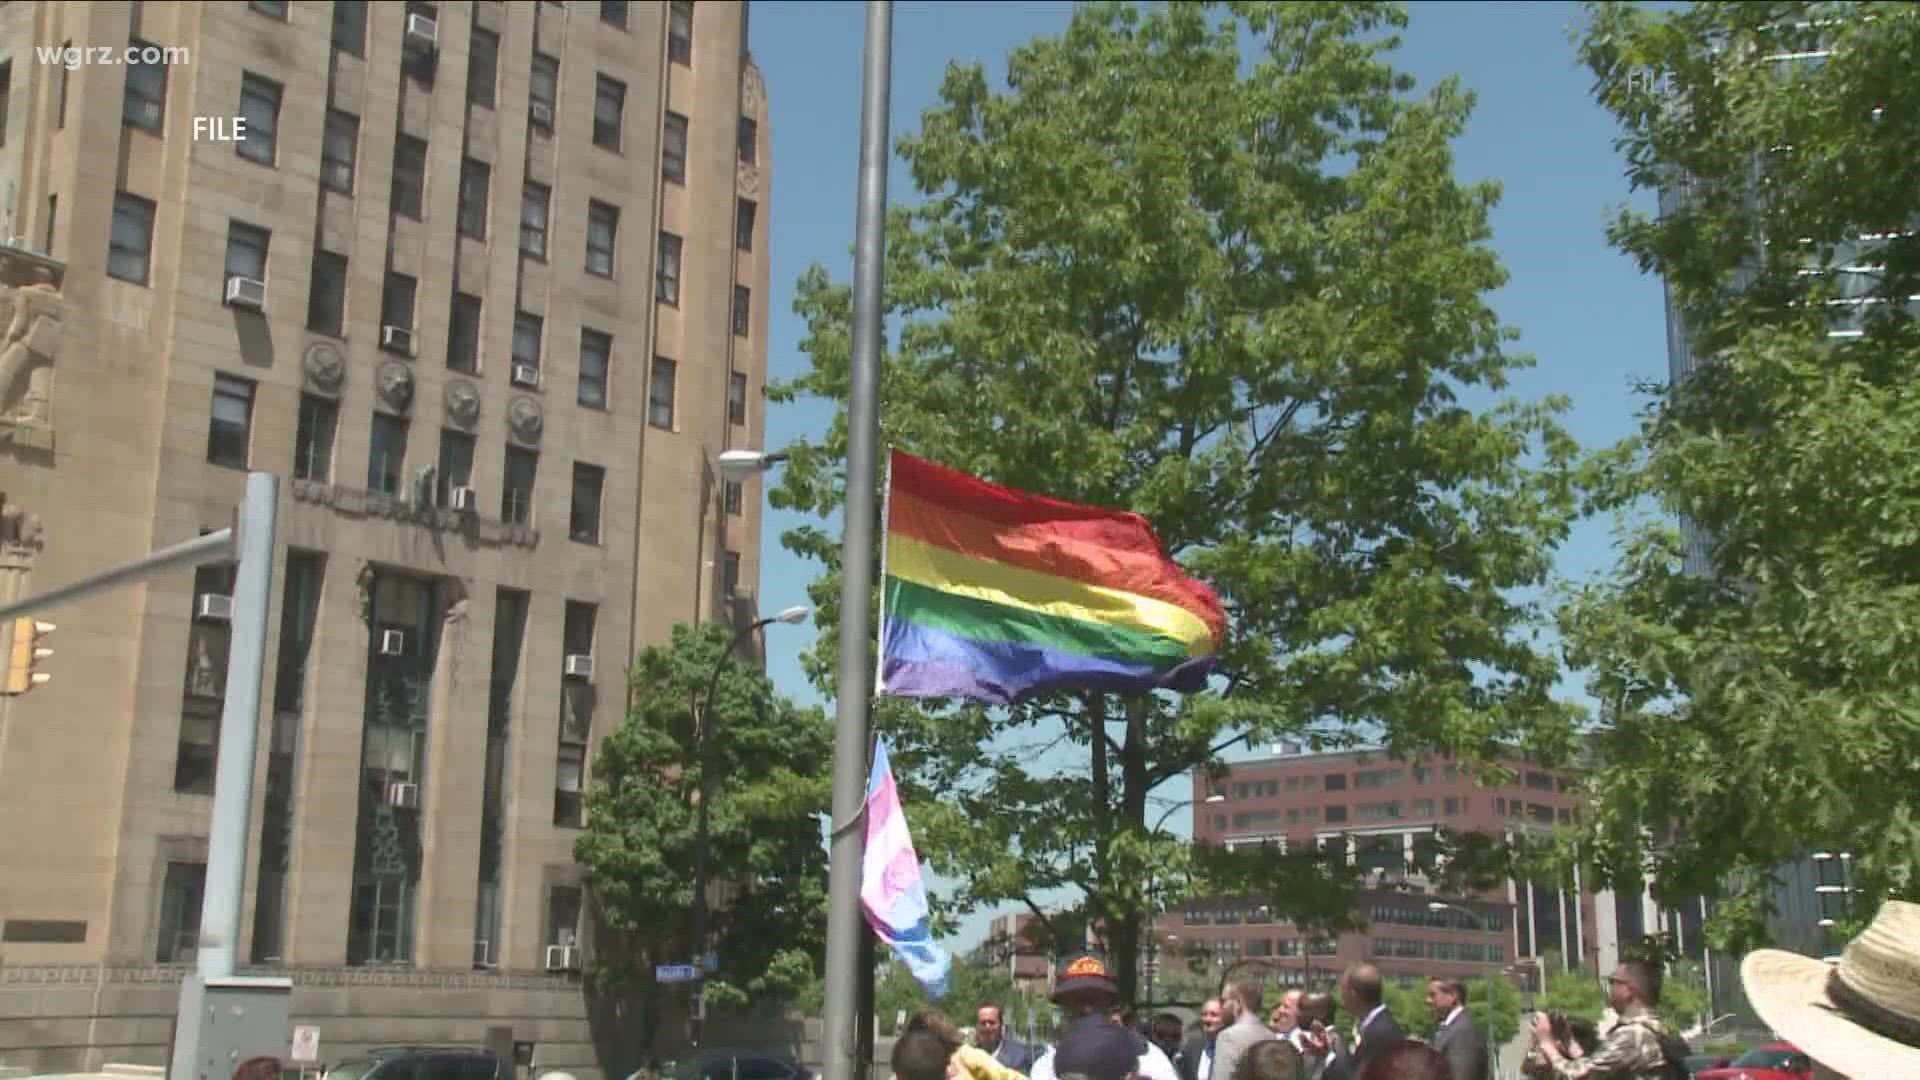 Pride parade and festival returning in June